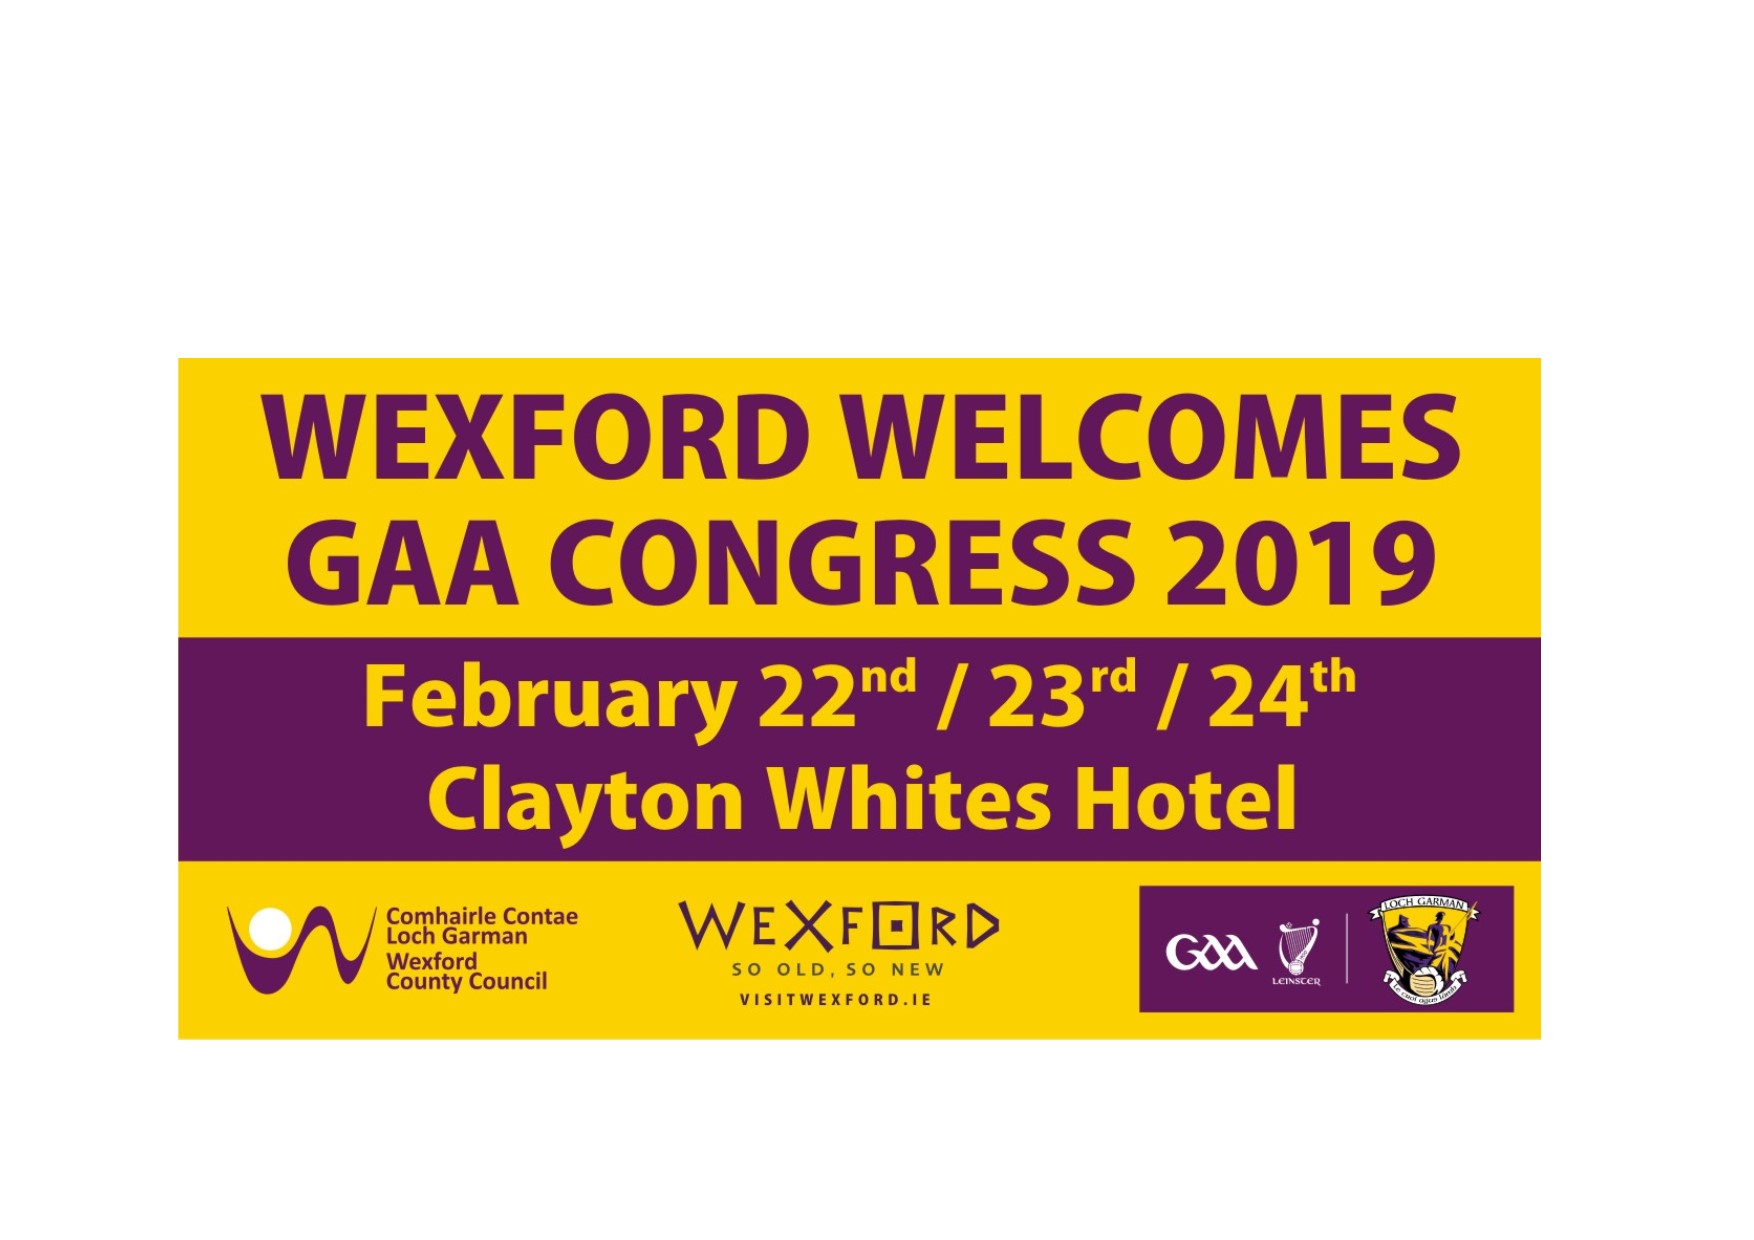 Wexford GAA Welcomes delegates from all over the World to Wexford this weekend for the 2019 GAA Congress